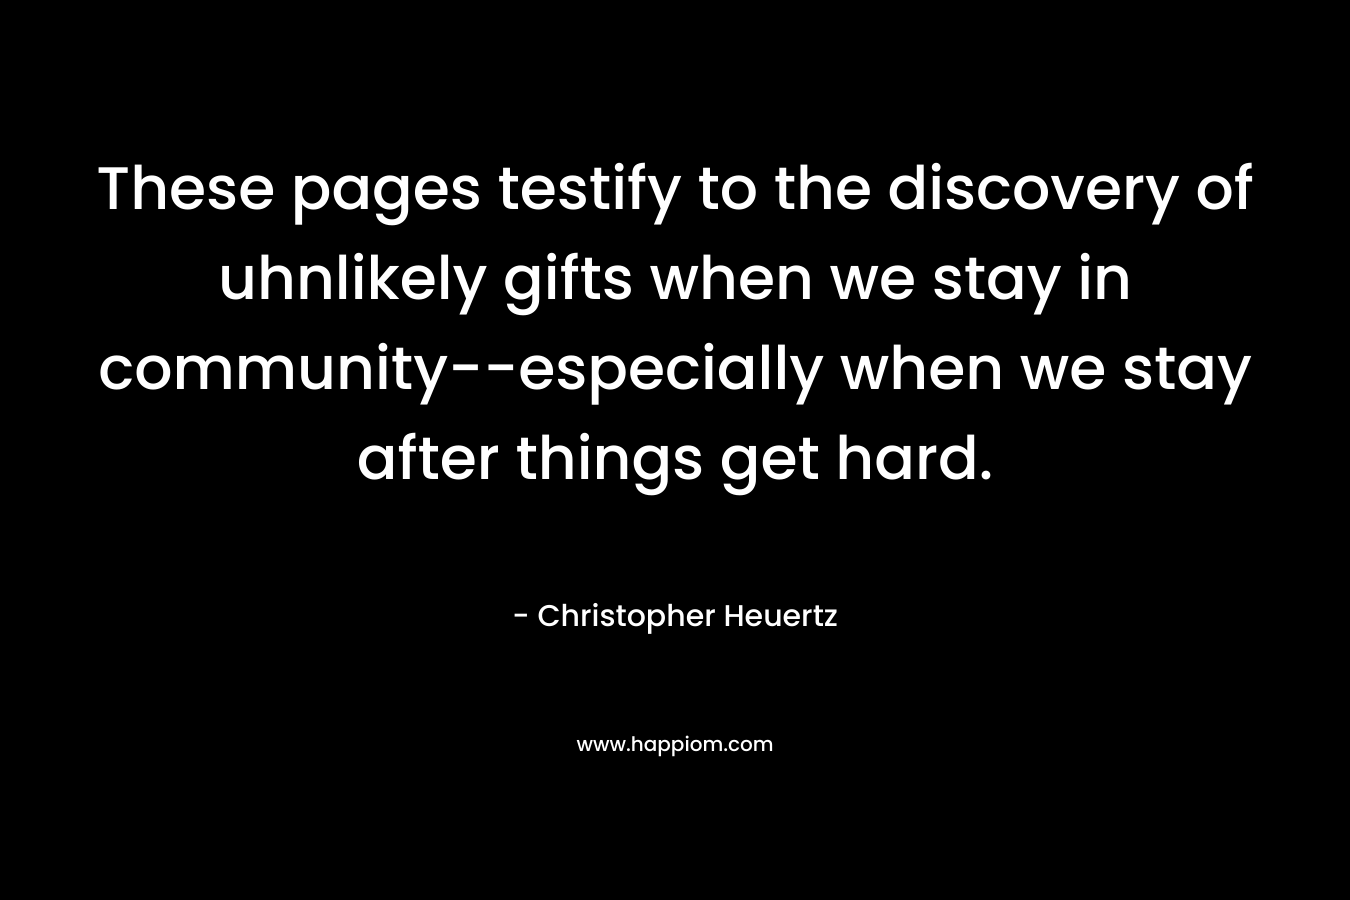 These pages testify to the discovery of uhnlikely gifts when we stay in community–especially when we stay after things get hard. – Christopher Heuertz